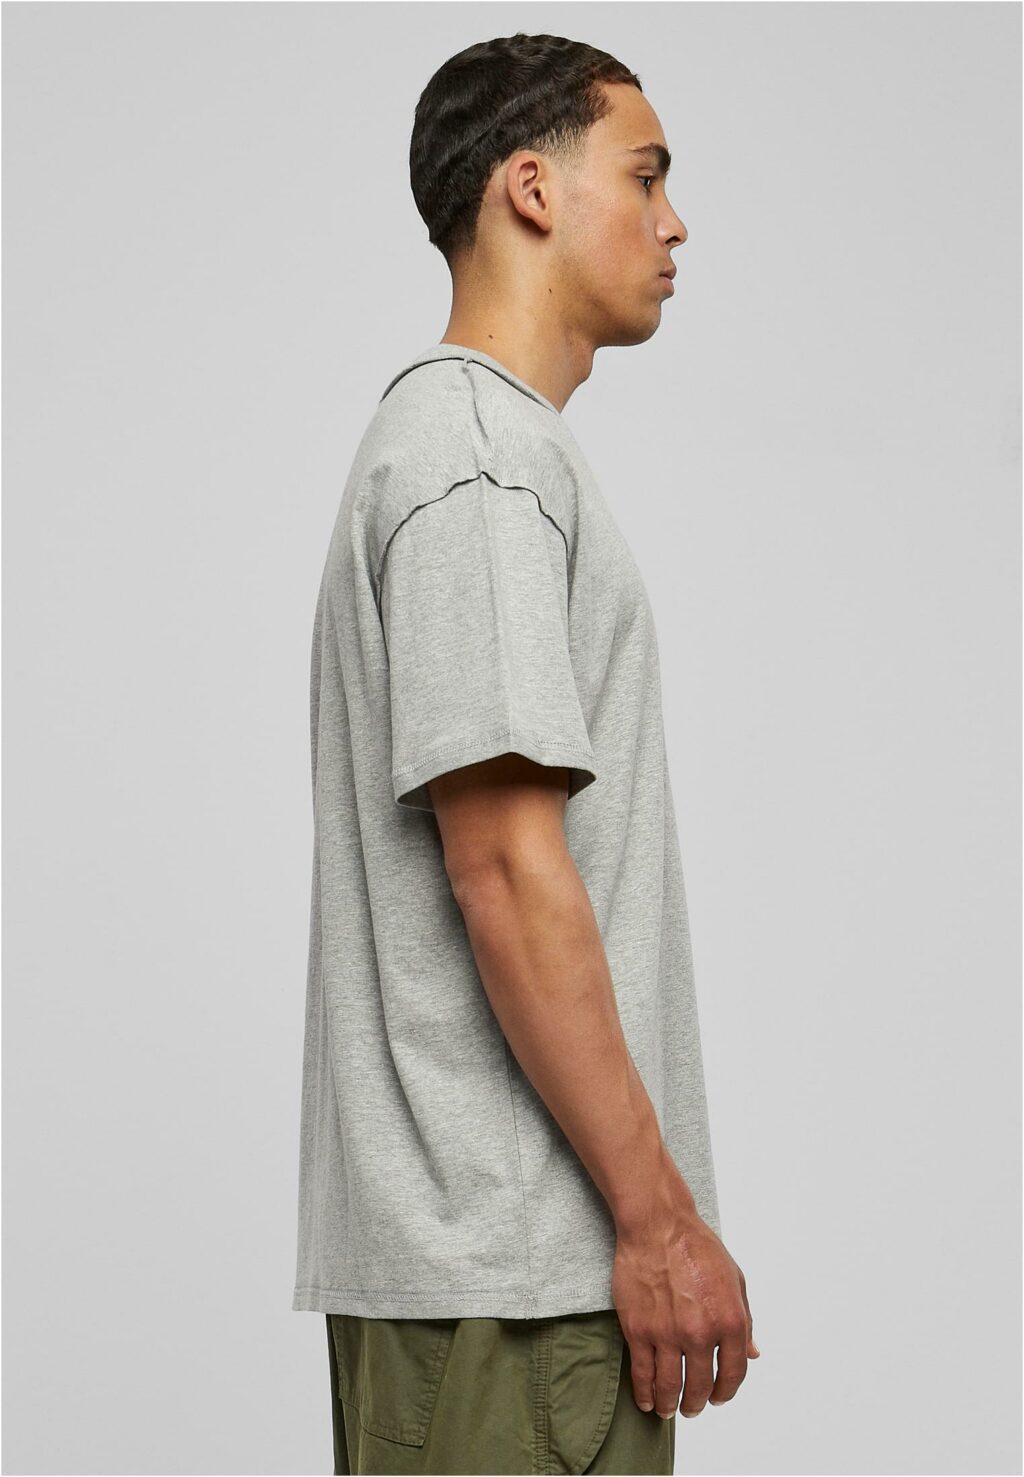 Urban Classics Oversized Inside Out Tee grey TB5935